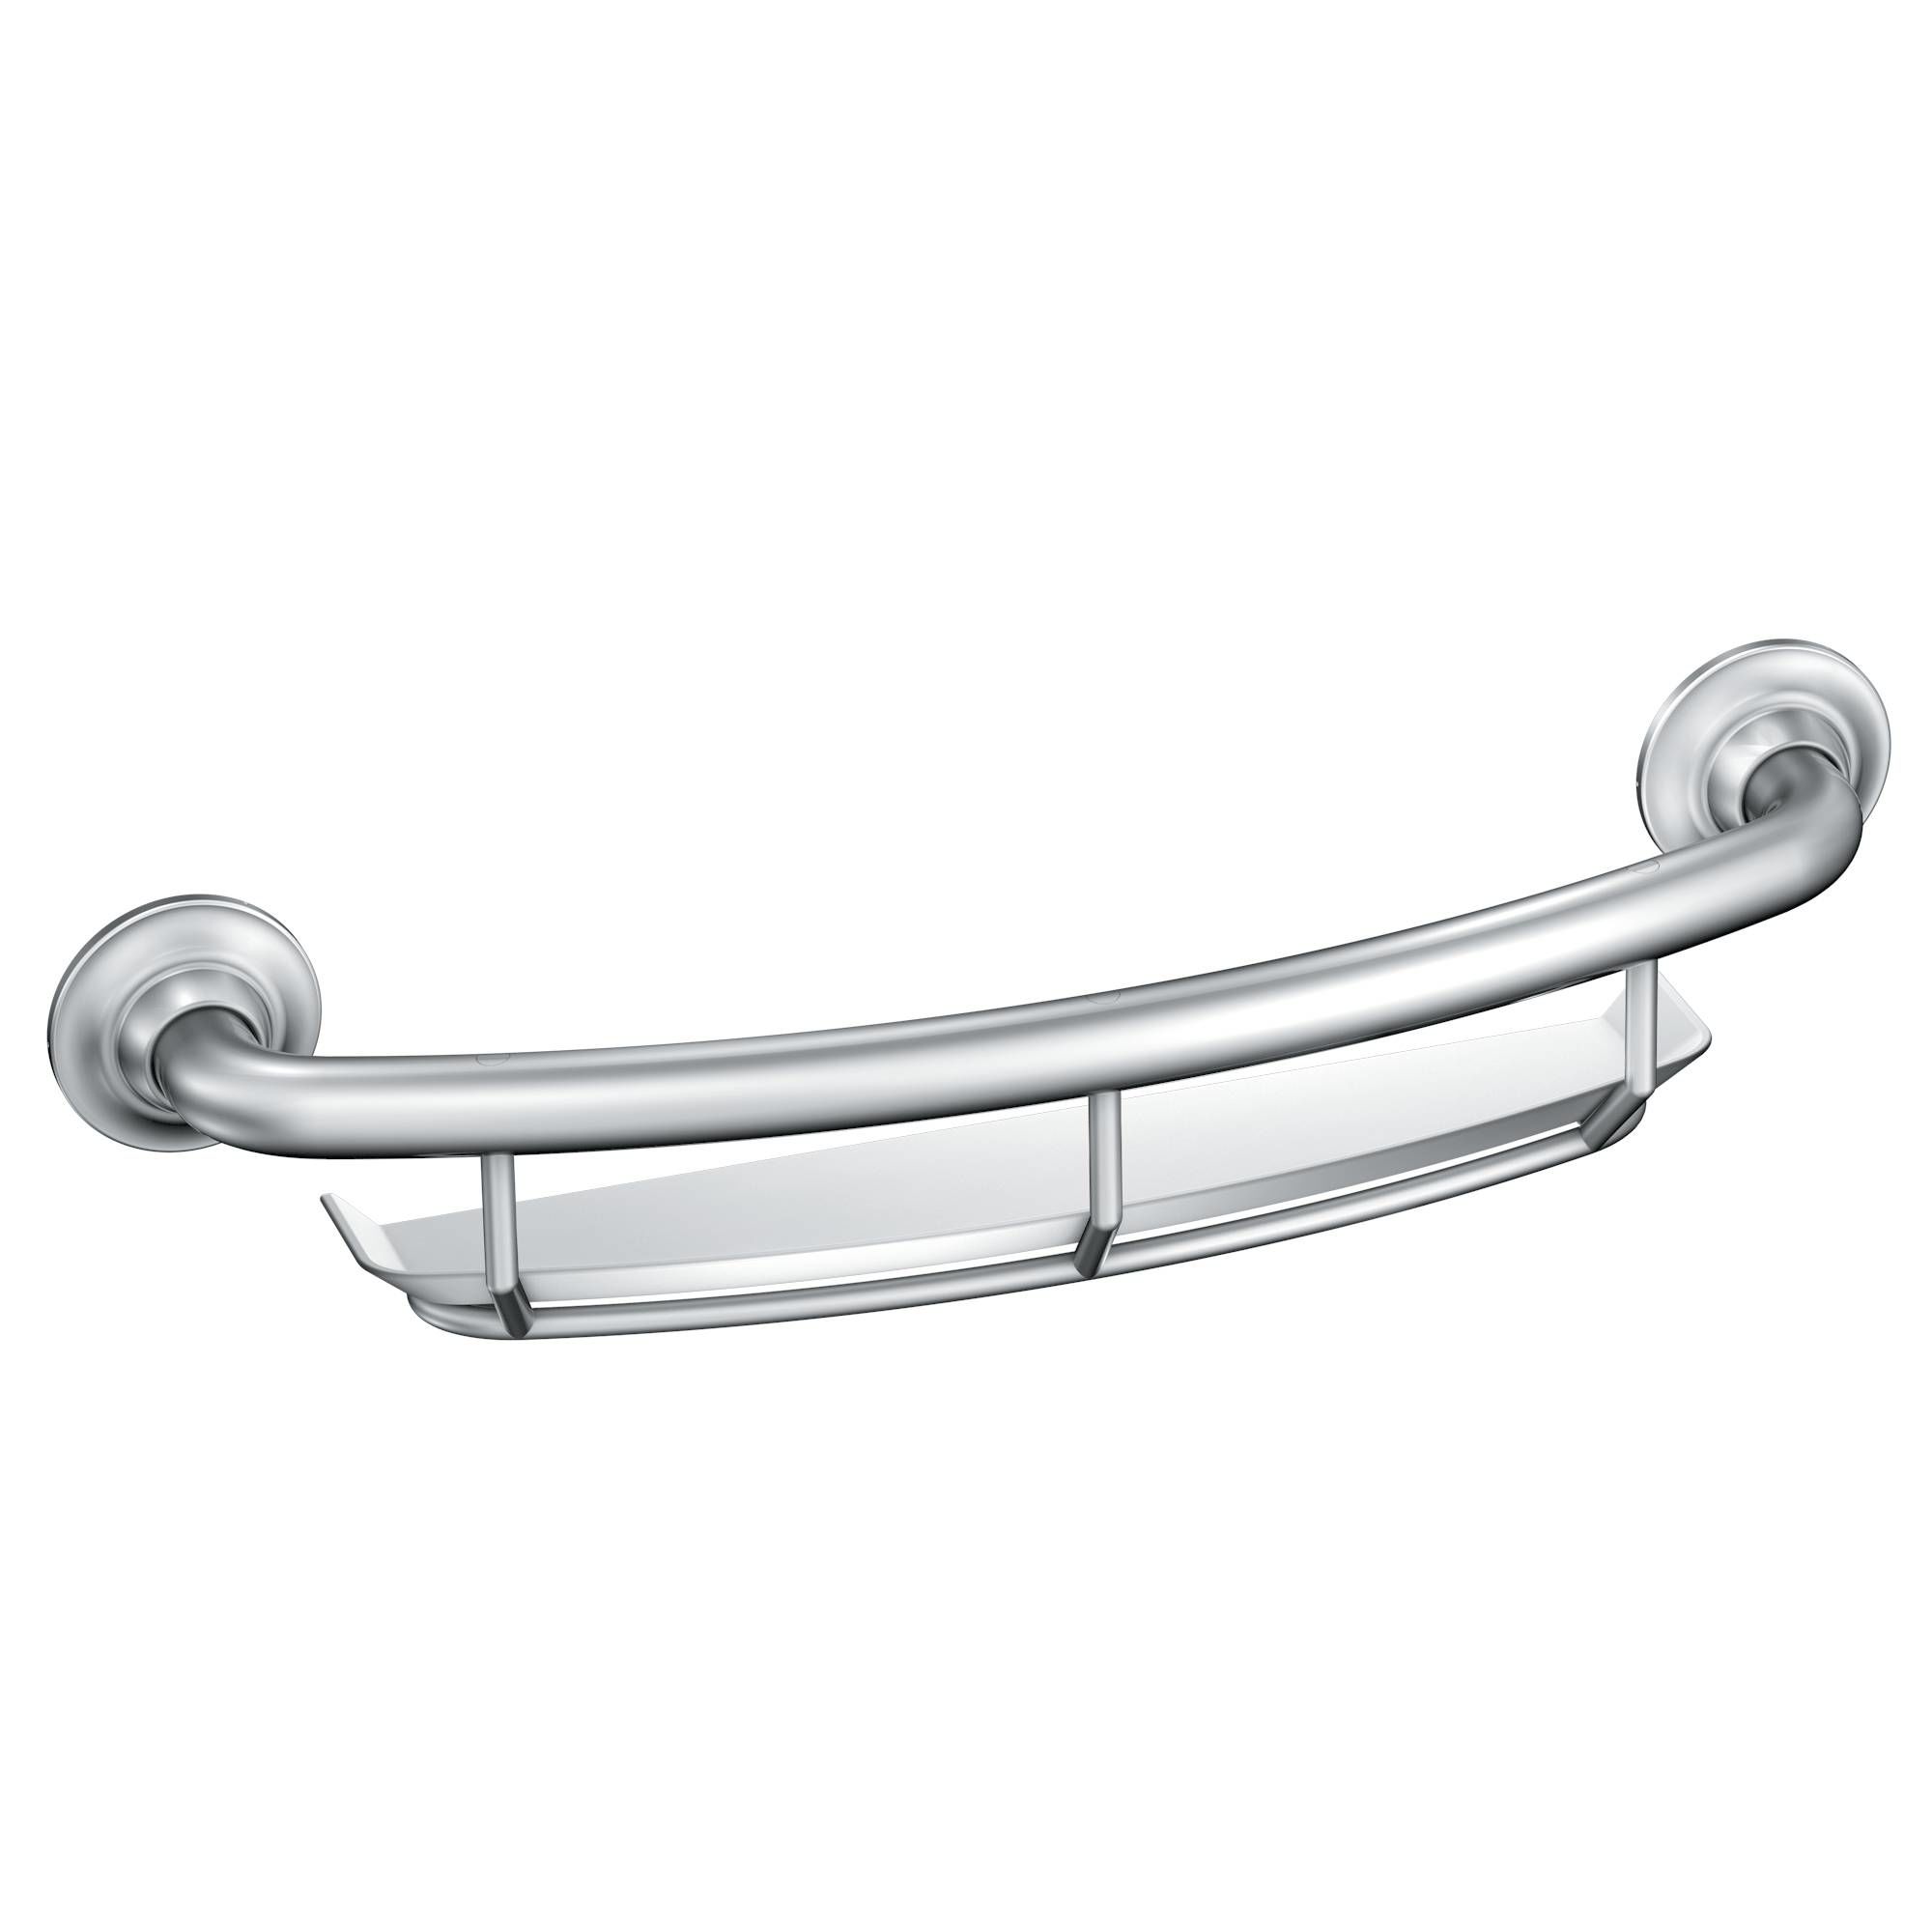 Moen Home&Care Designer Grab Bar with Integrated Shelf Brand NEW in OPEN Box 